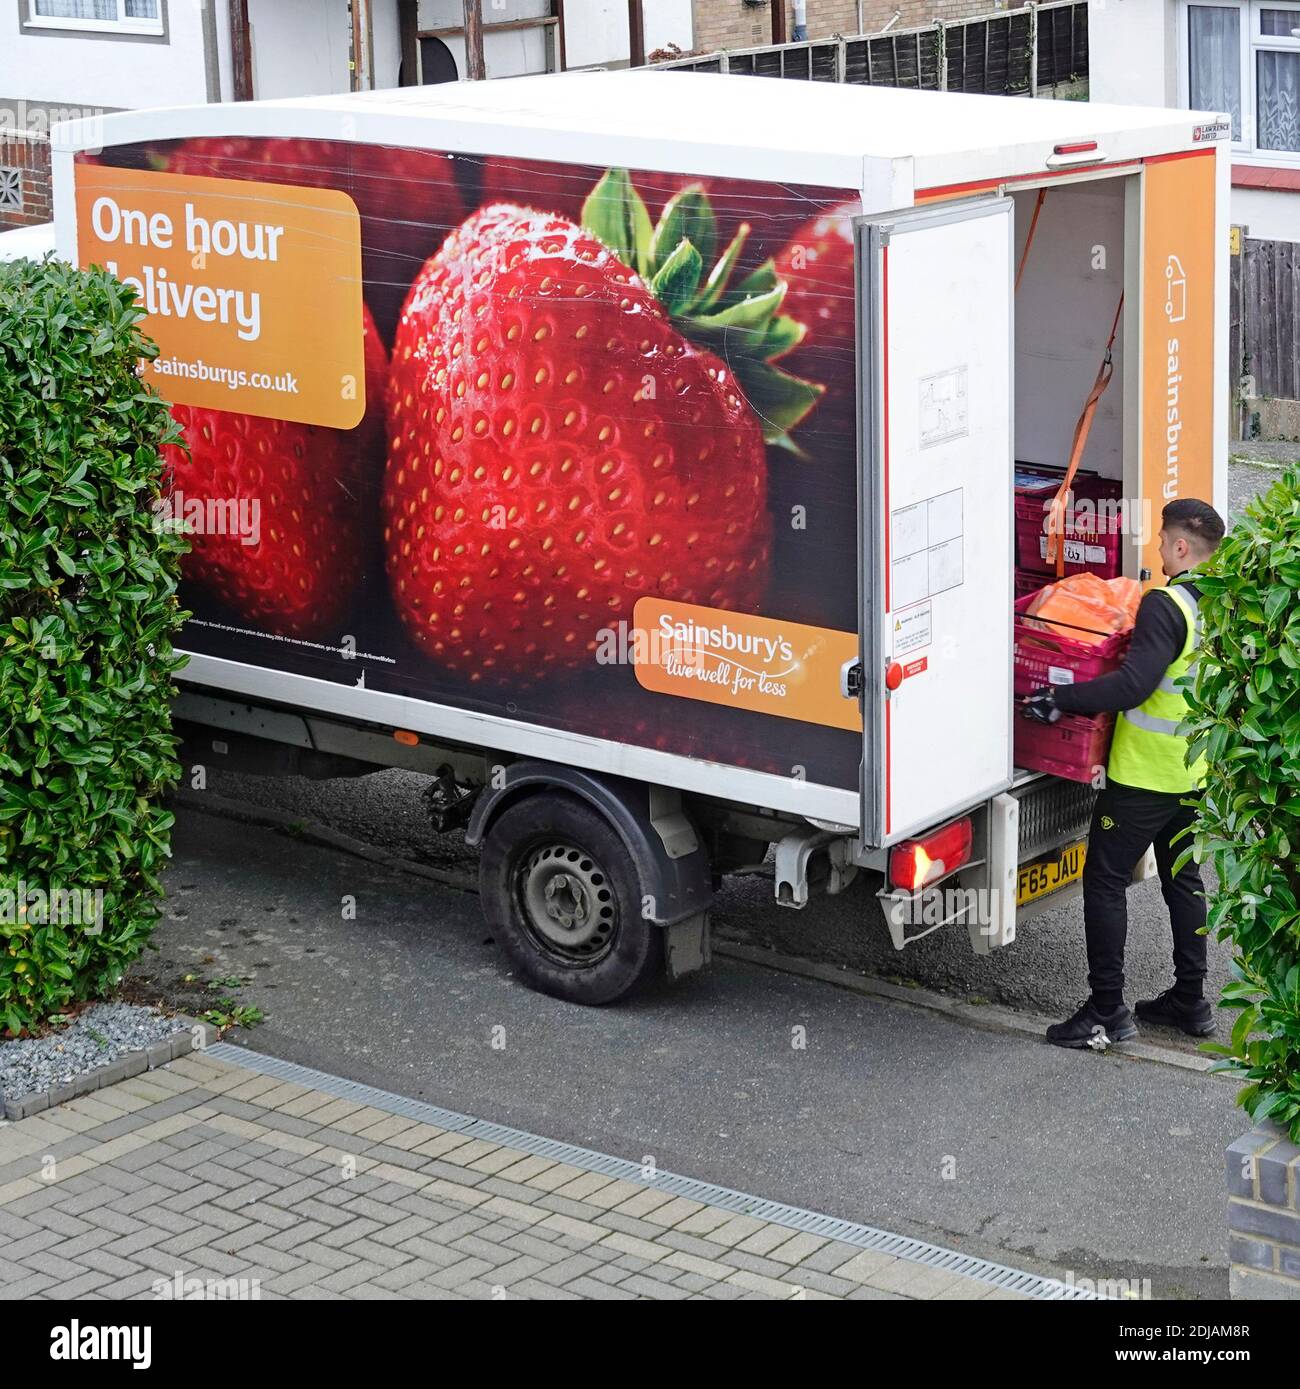 Looking down at Sainsburys supermarket online food shopping delivery driver & side of van advertising strawberry & one hour delivery Essex England UK Stock Photo